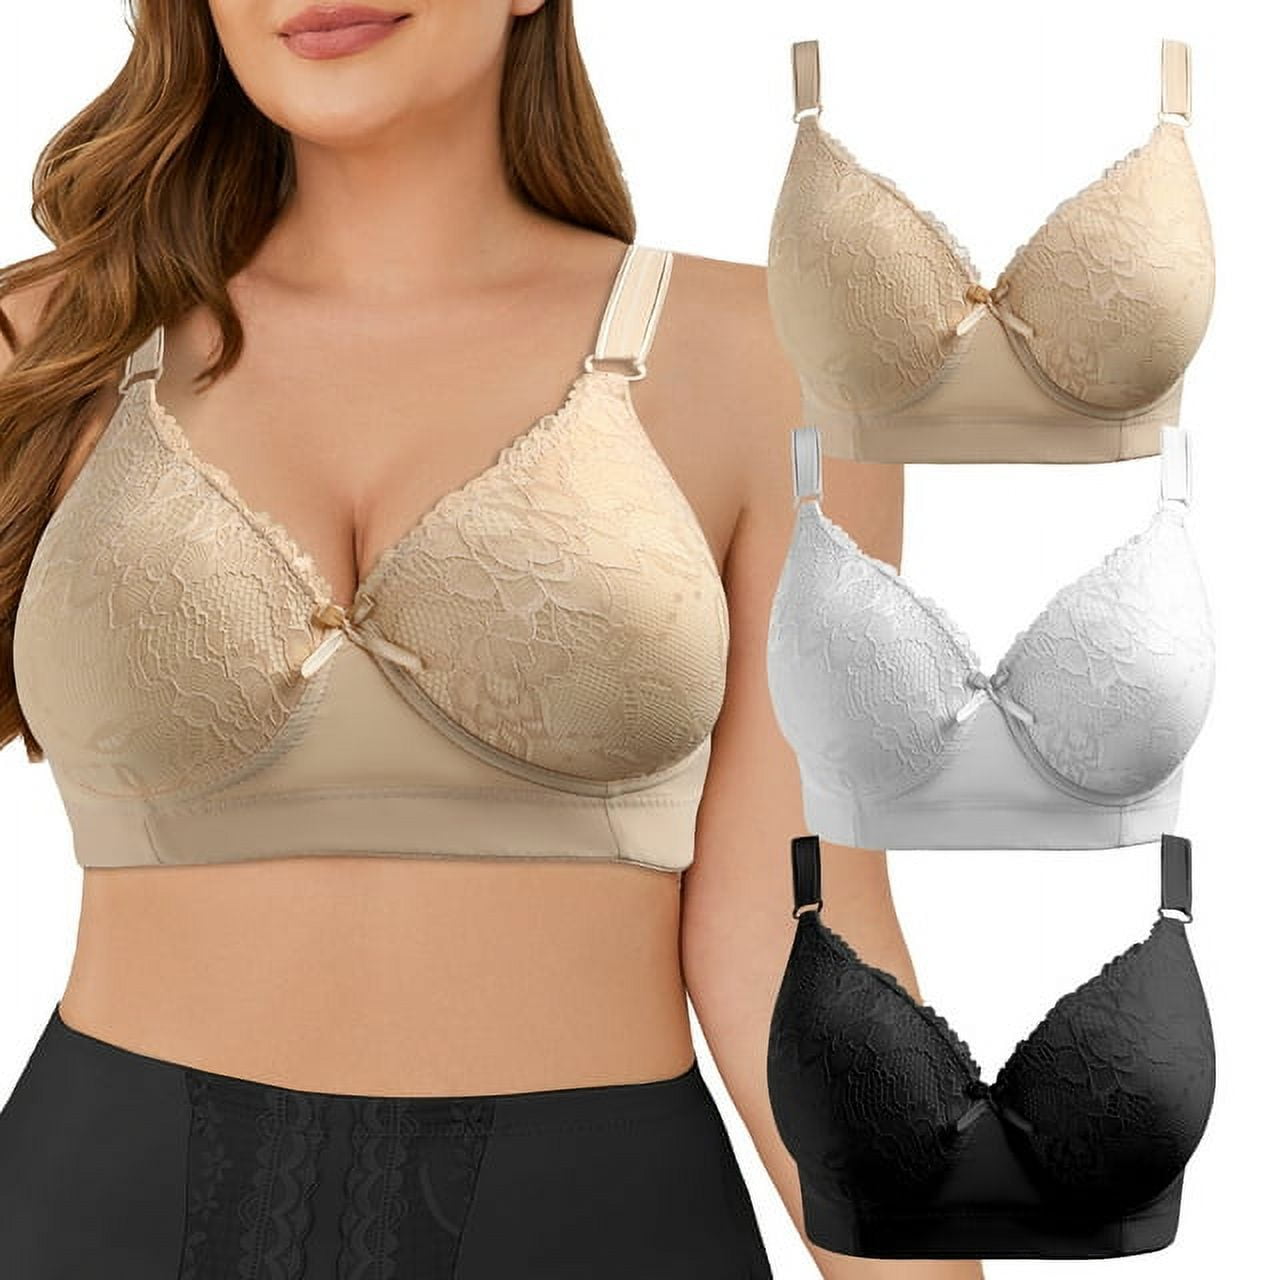 14 COLORS WOMEN'S Lace Clip-on Mock Camisole Bra Insert Overlay